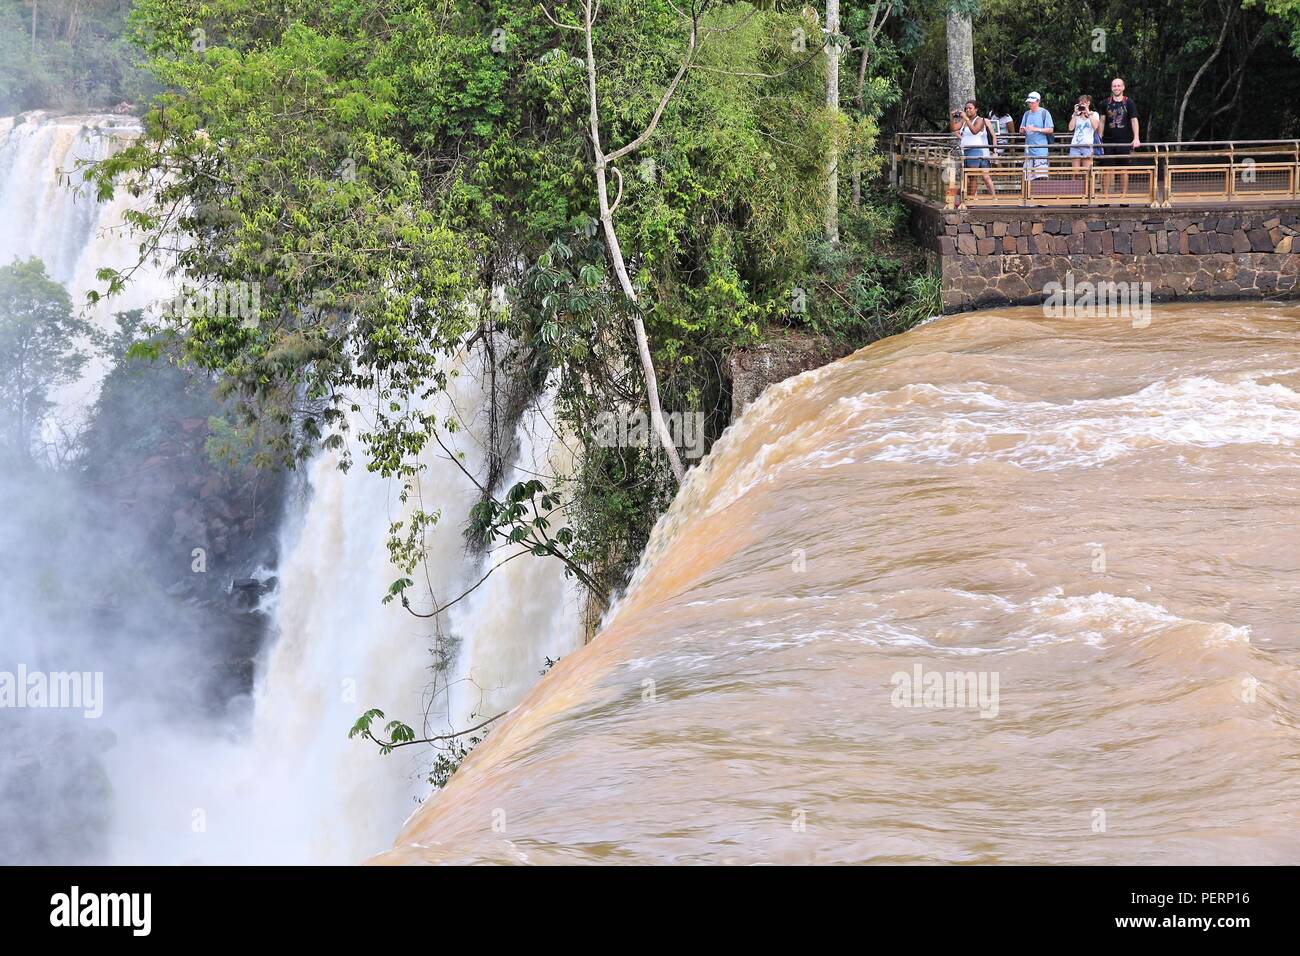 IGUAZU NATIONAL PARK, ARGENTINA - OCTOBER 10, 2014: People visit Iguazu National Park in Argentina. The park was established in 1934 and is a UNESCO W Stock Photo